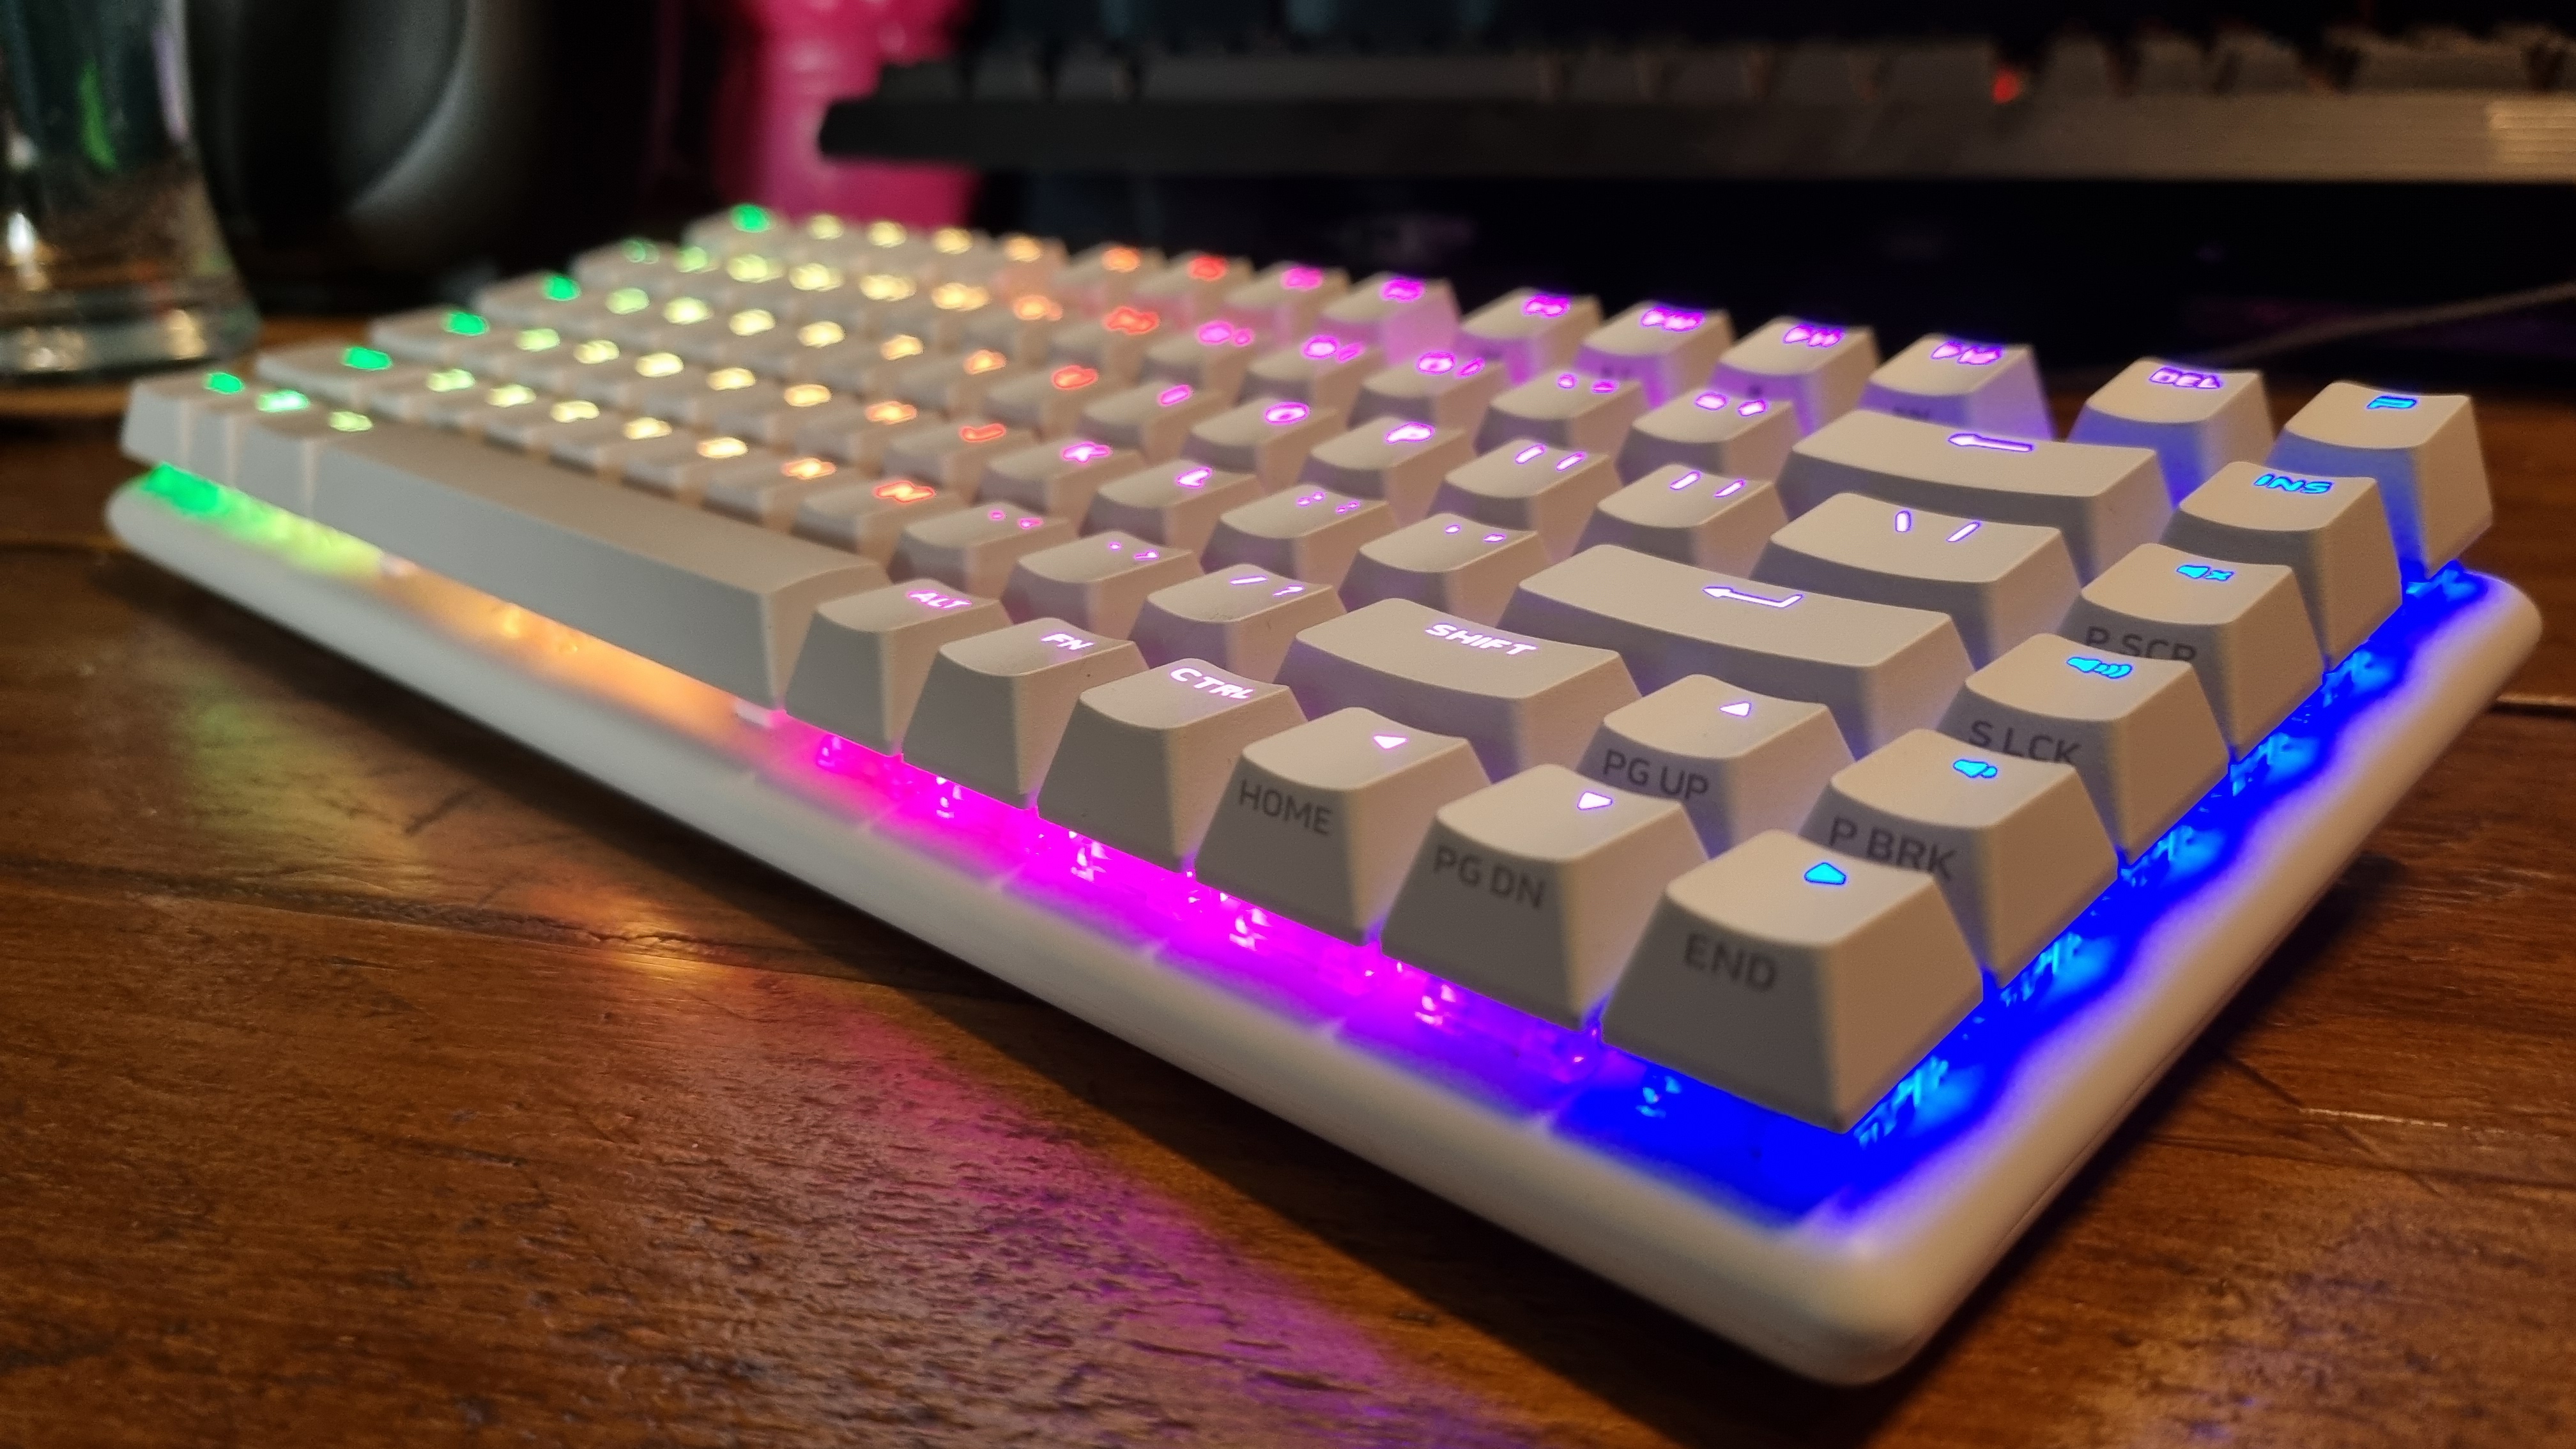 A side angle view of the RGB lighting of the Alienware Pro Wireless Gaming Keyboard